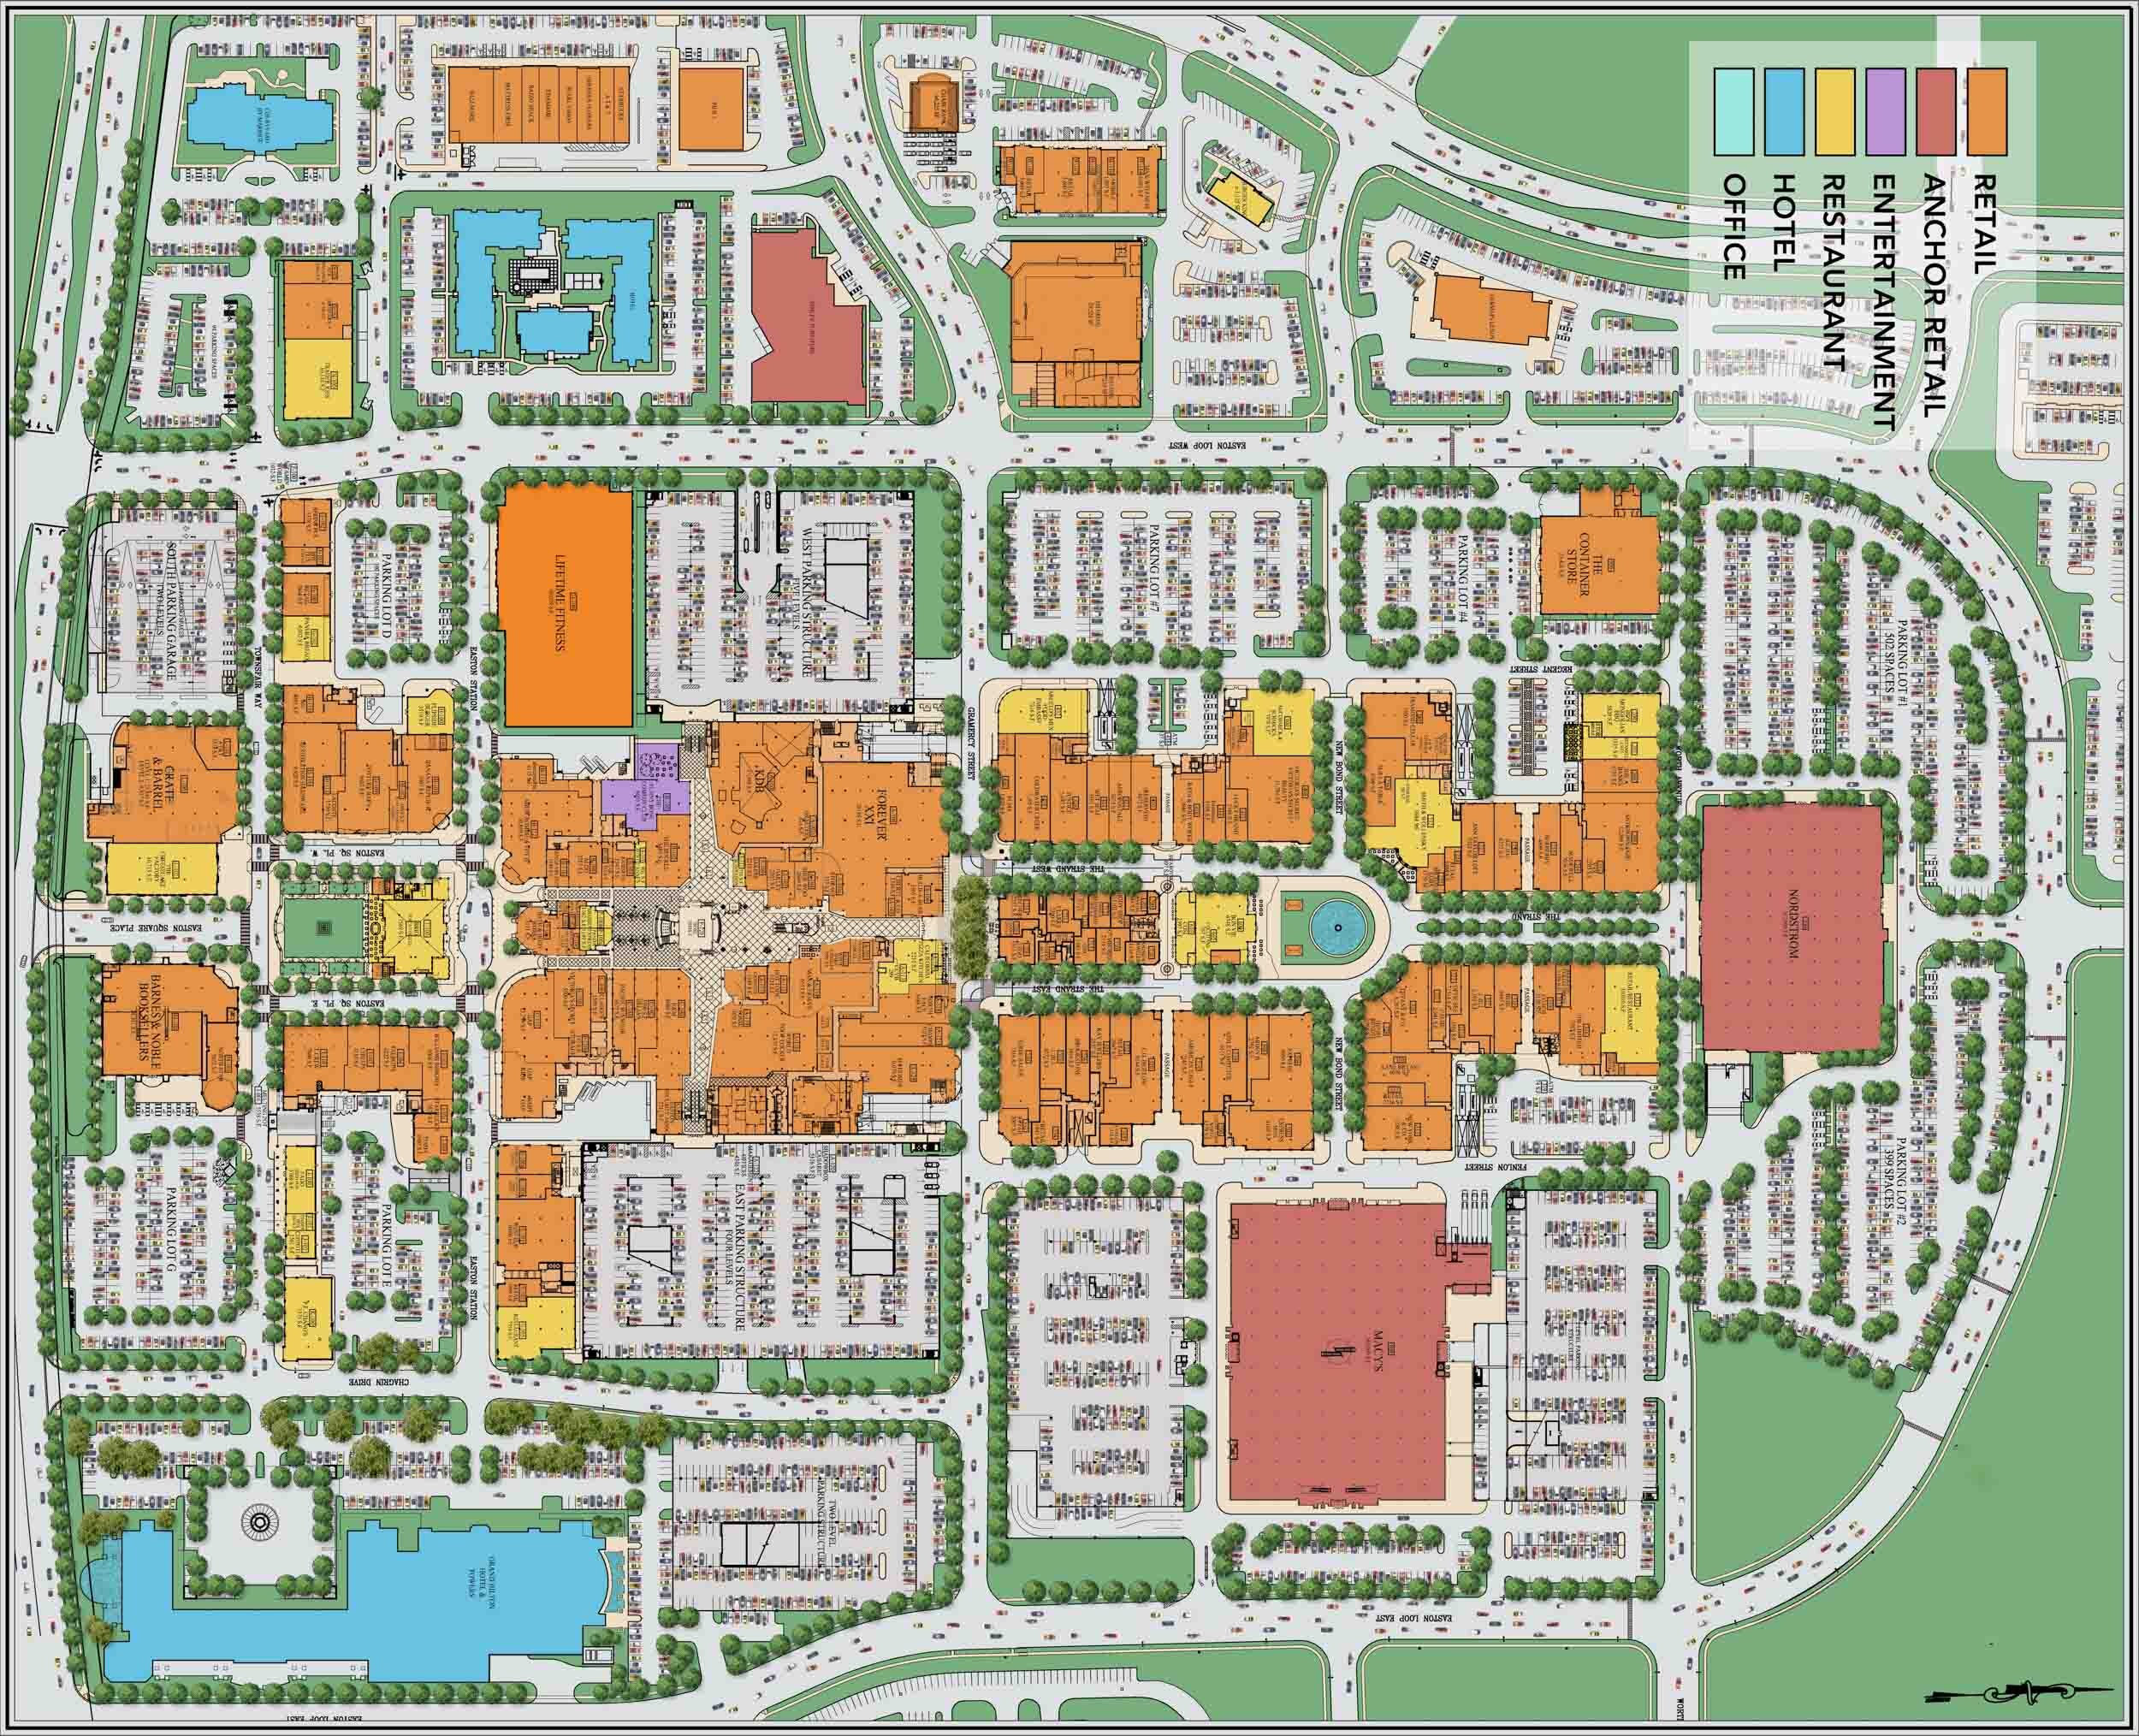 Easton Town Center Planning Layout